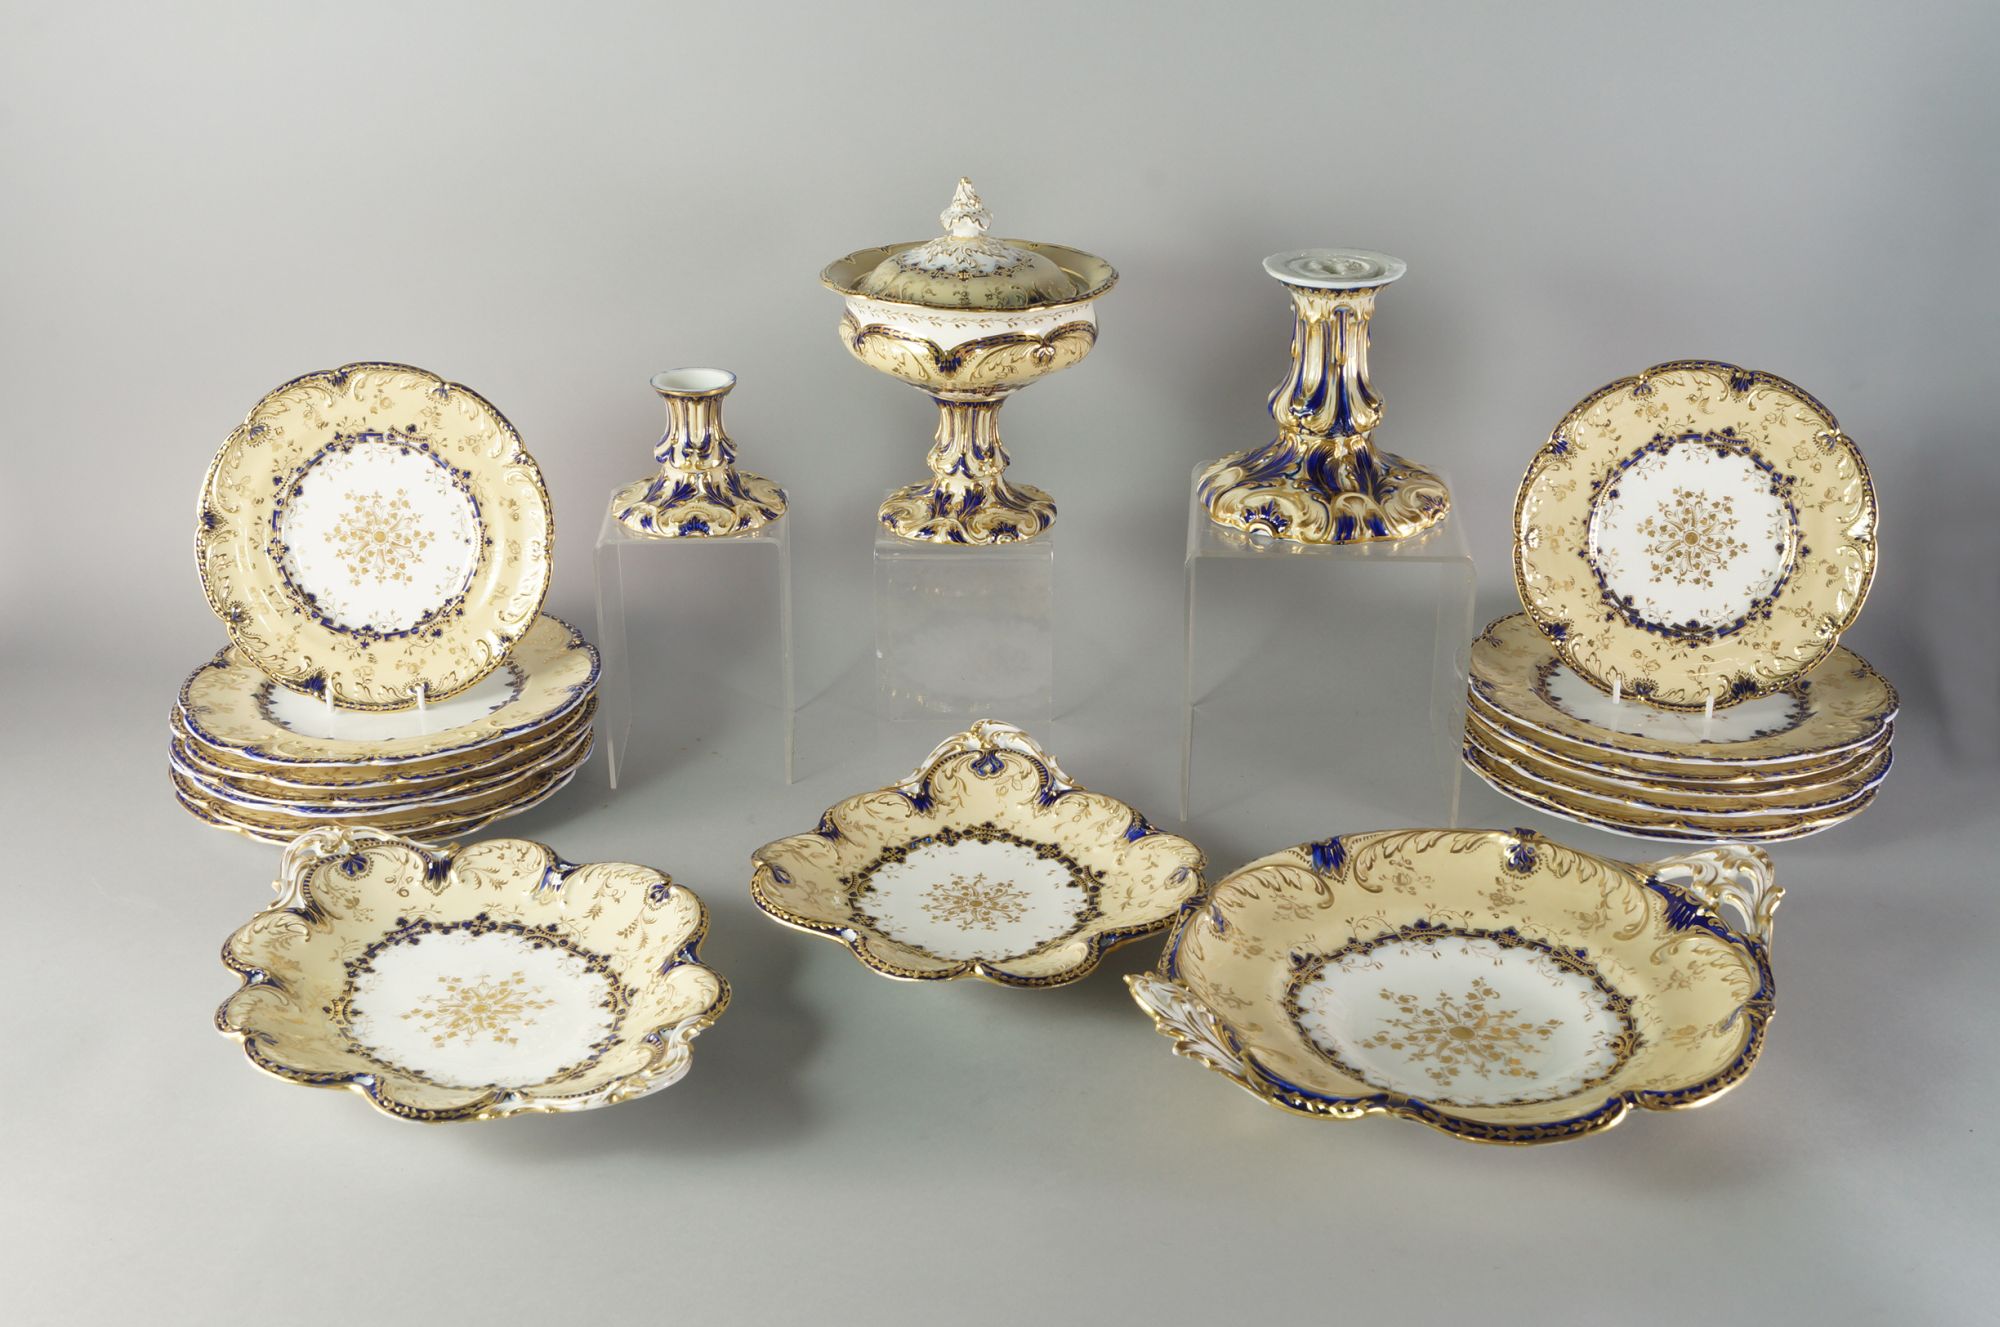 An English porcelain part dessert and dinner service, 19th century, with cream and blue borders,